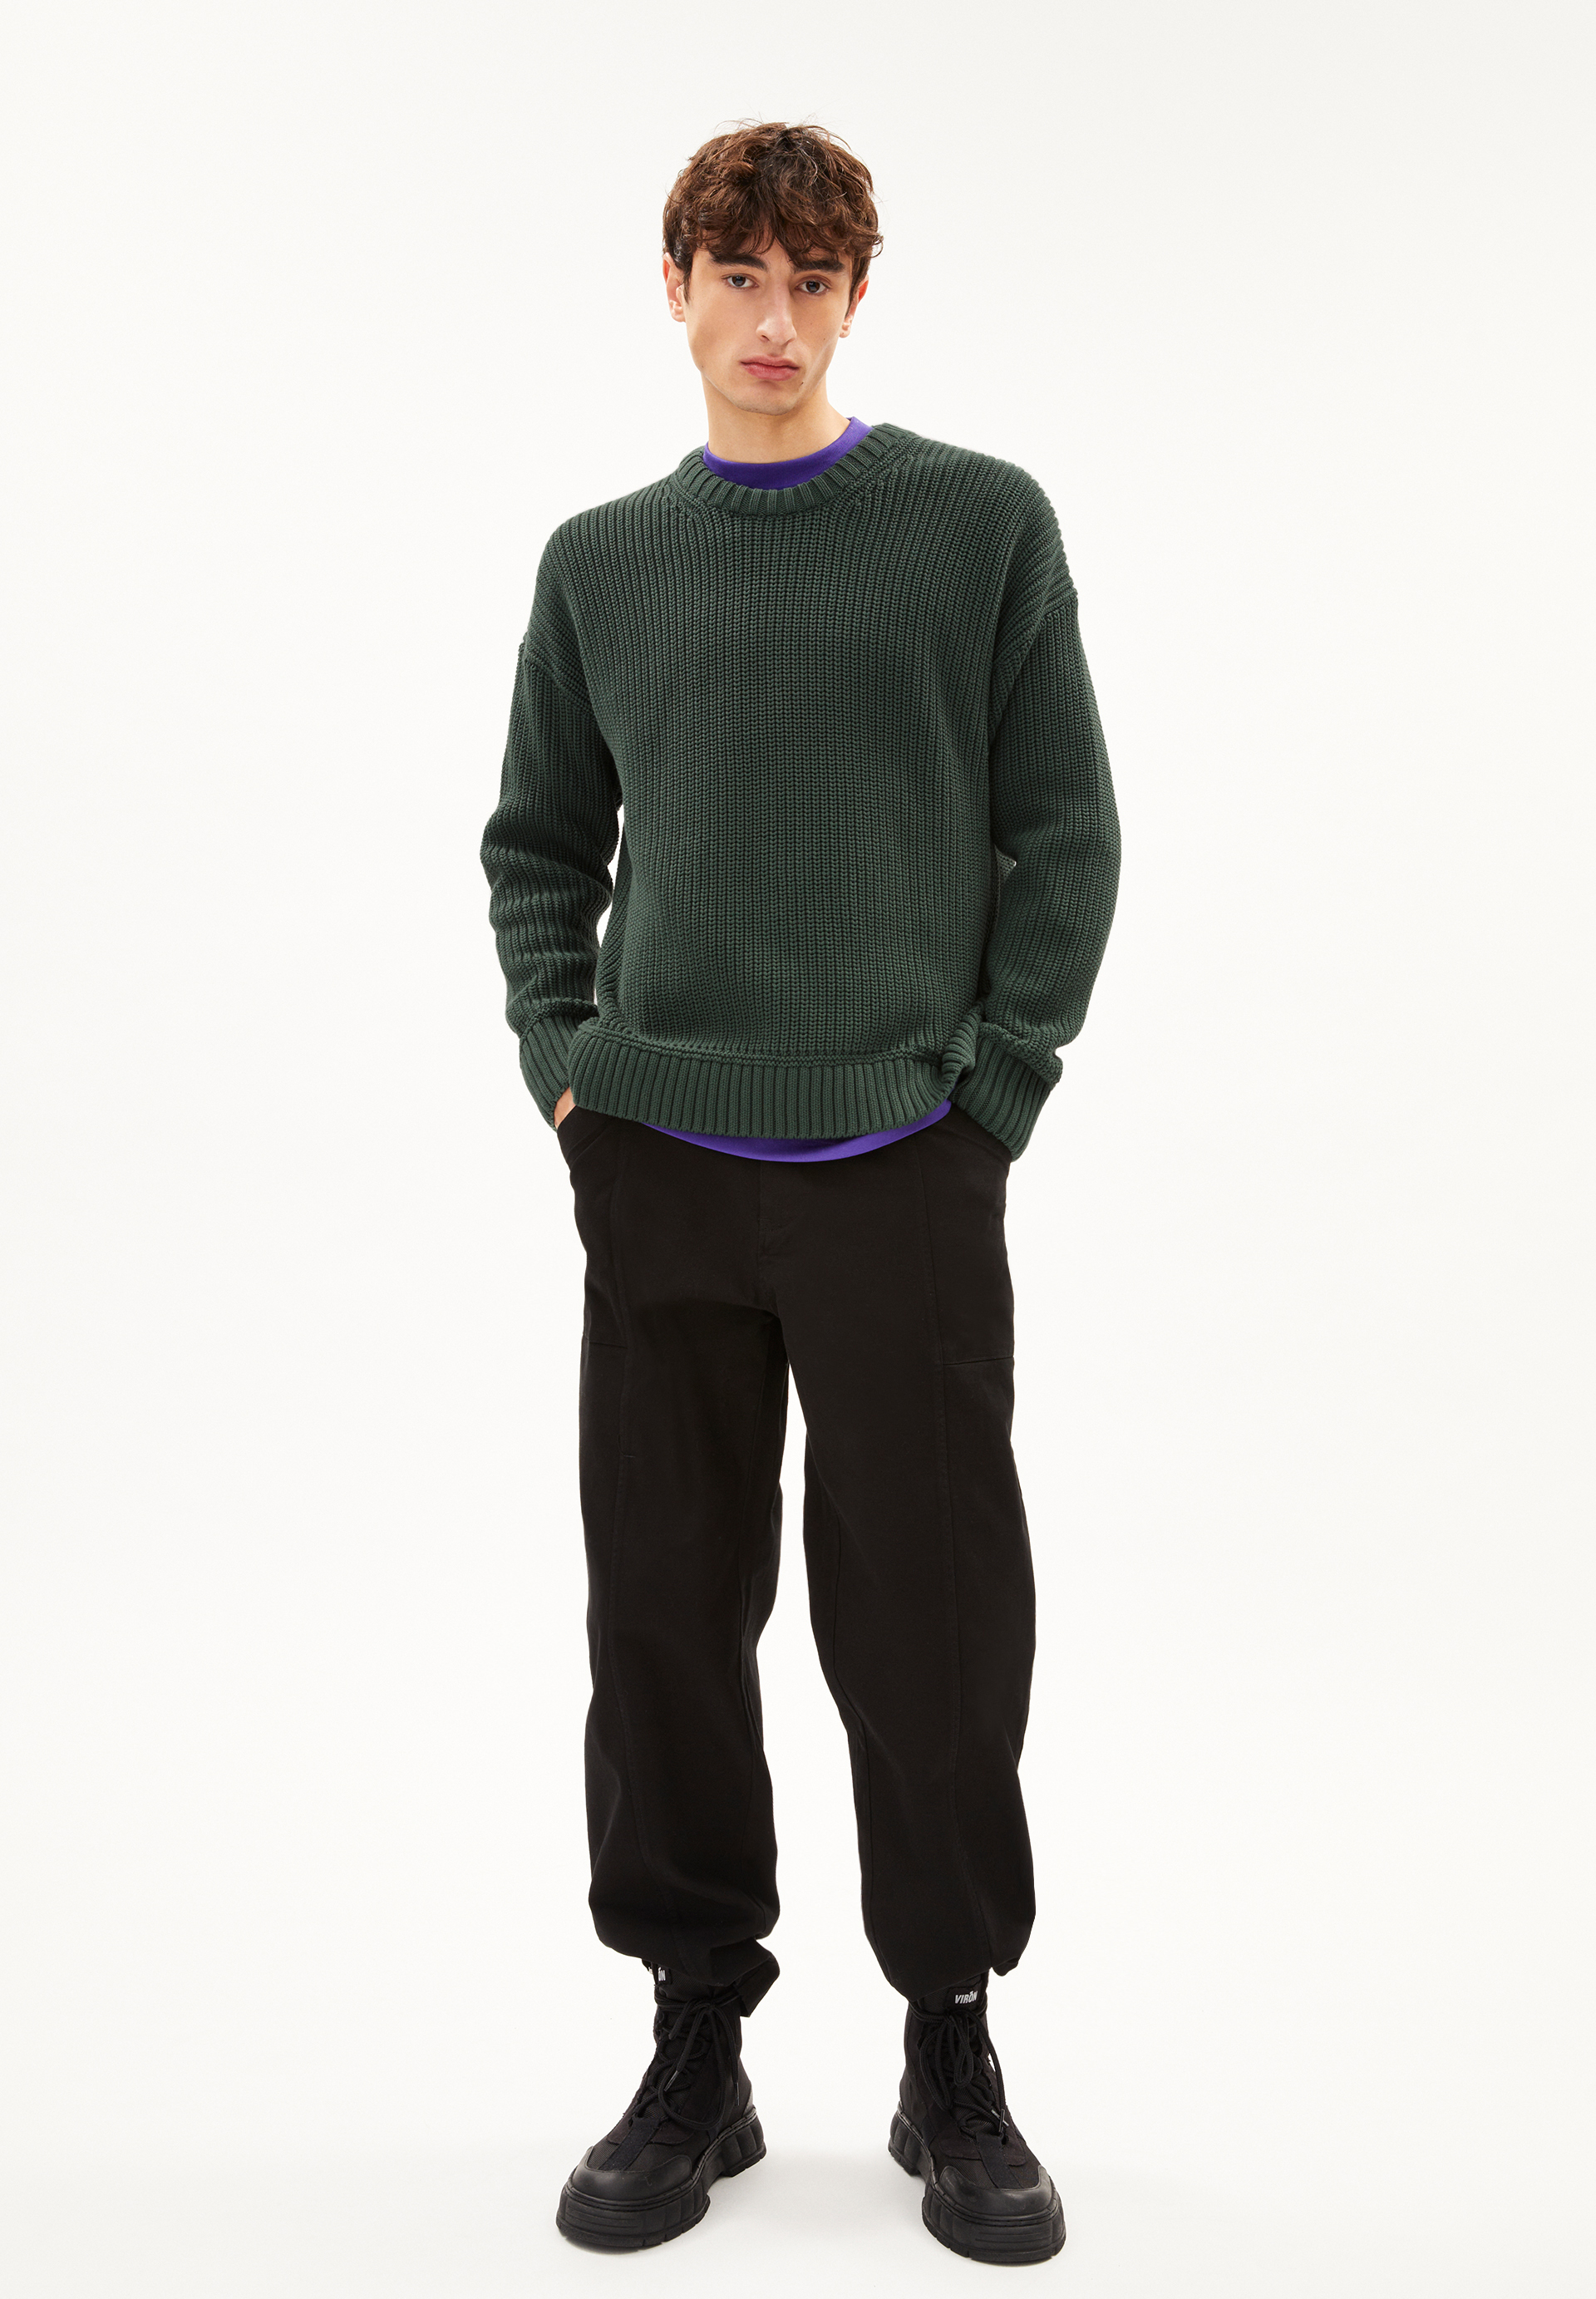 OSKAARES Sweater Relaxed Fit made of Organic Cotton